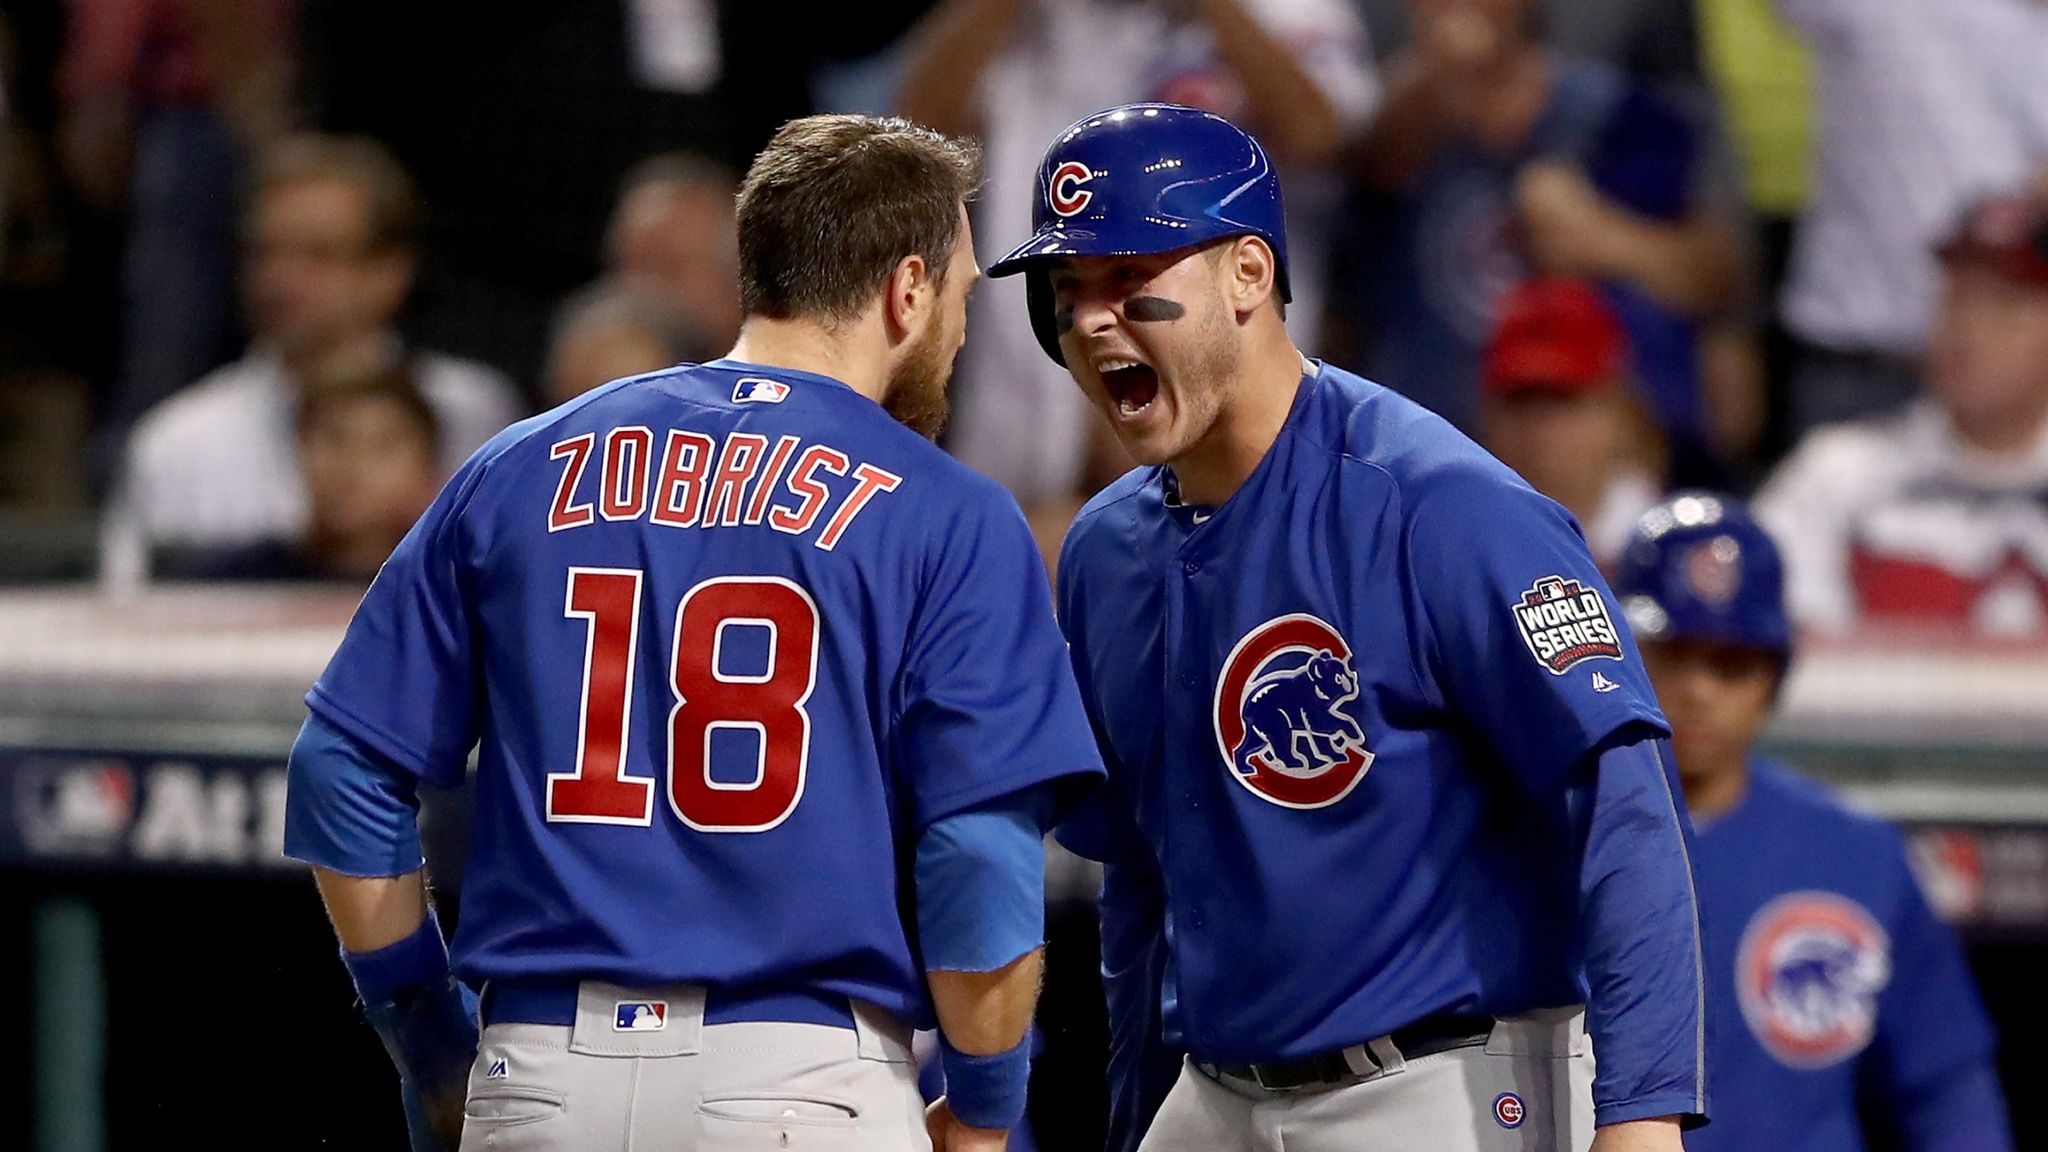 Chicago win world series for the first time since 1908 Baseball News Sky Sports